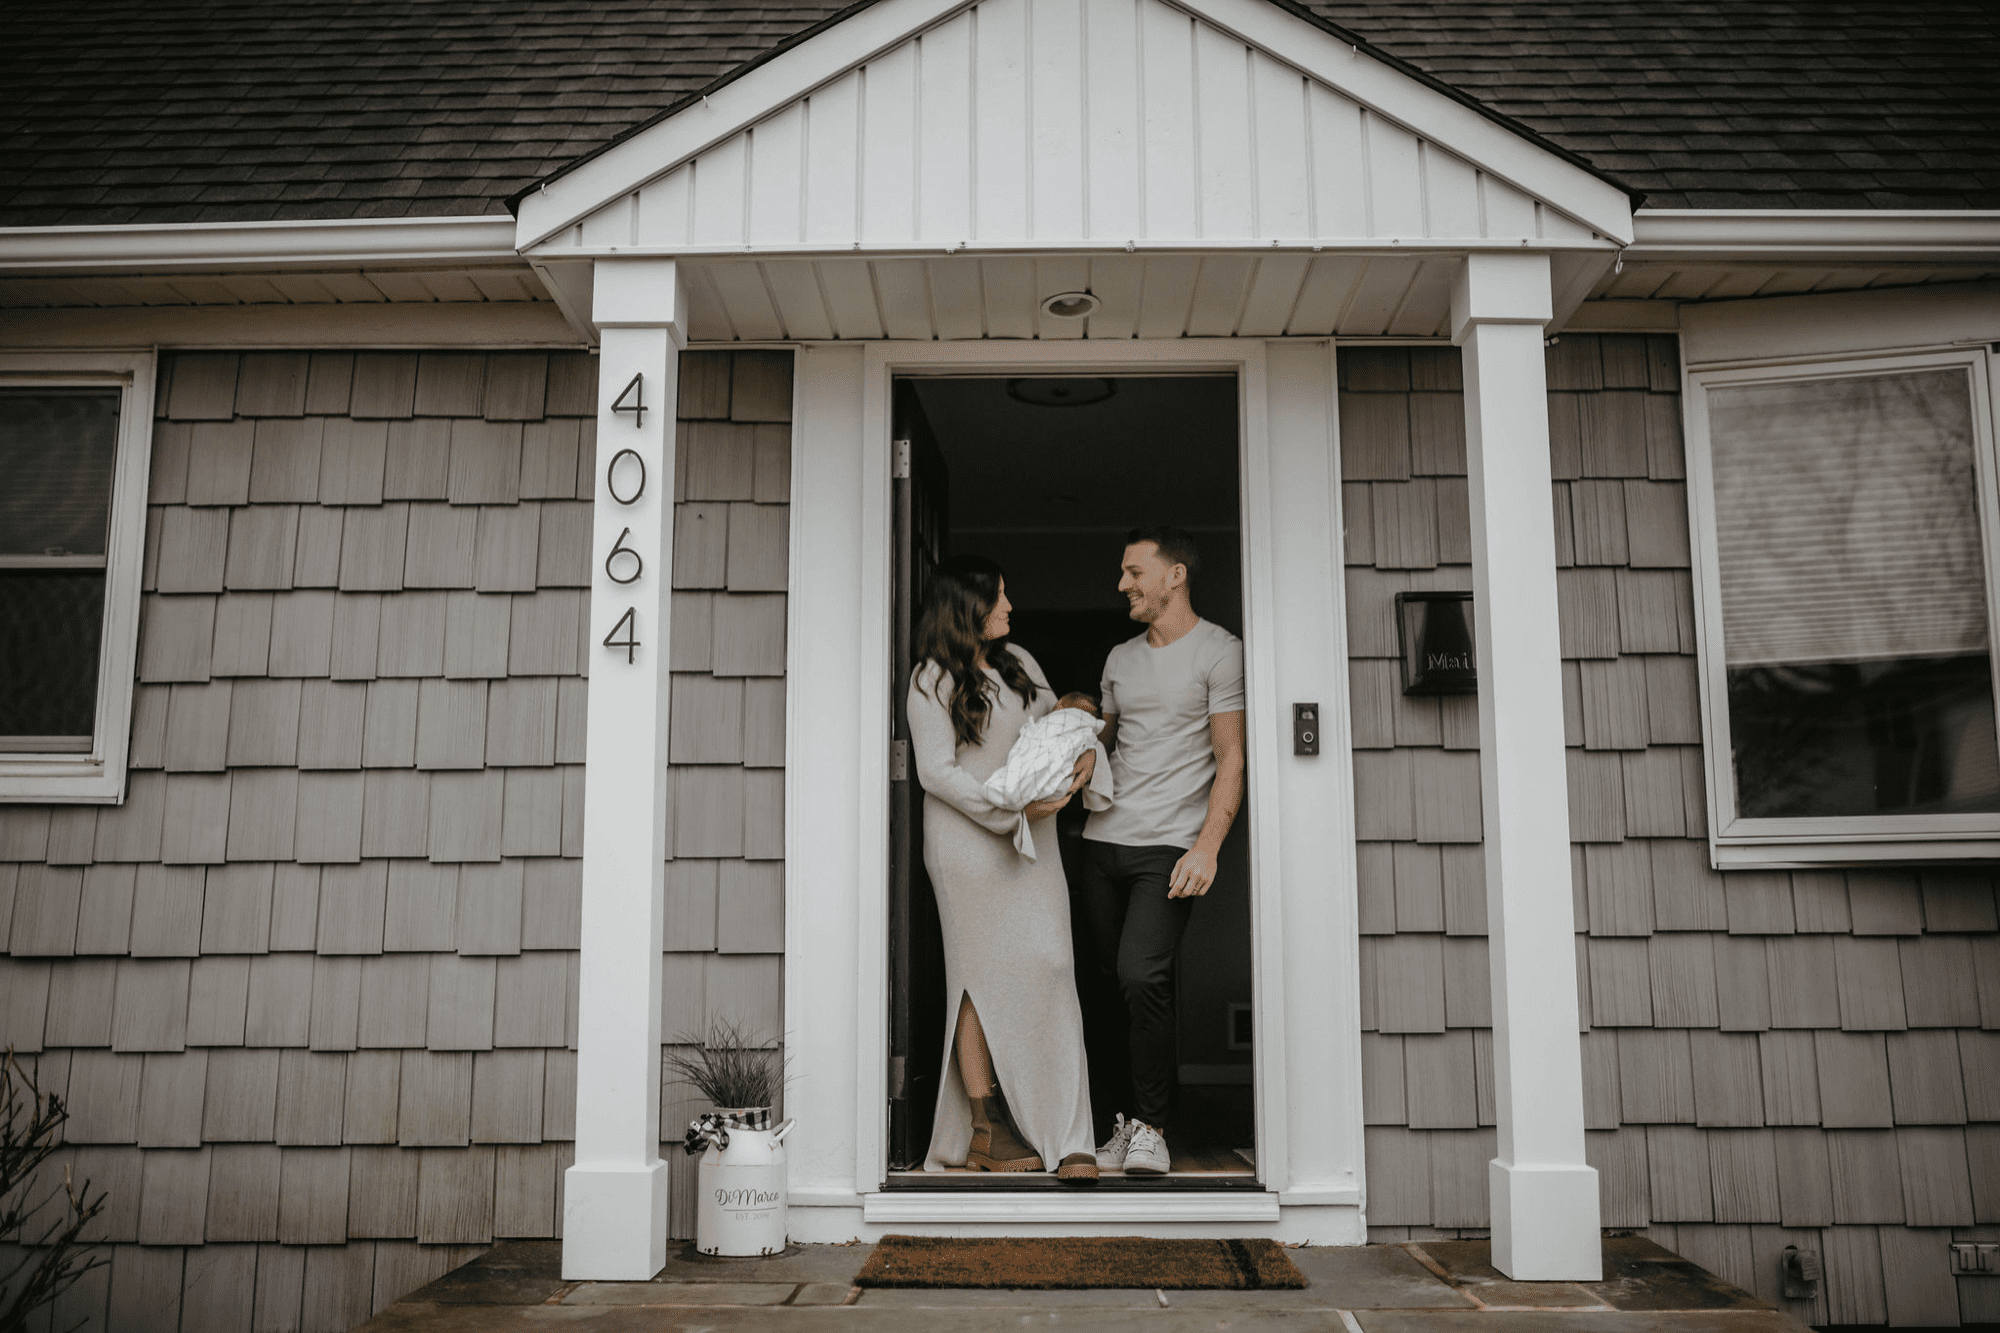 Front door family picture. At home photoshoot. In home newborn photos. Newborn photoshoot. Neutral color family photos. long island maternity photographers. Maternity photography near me